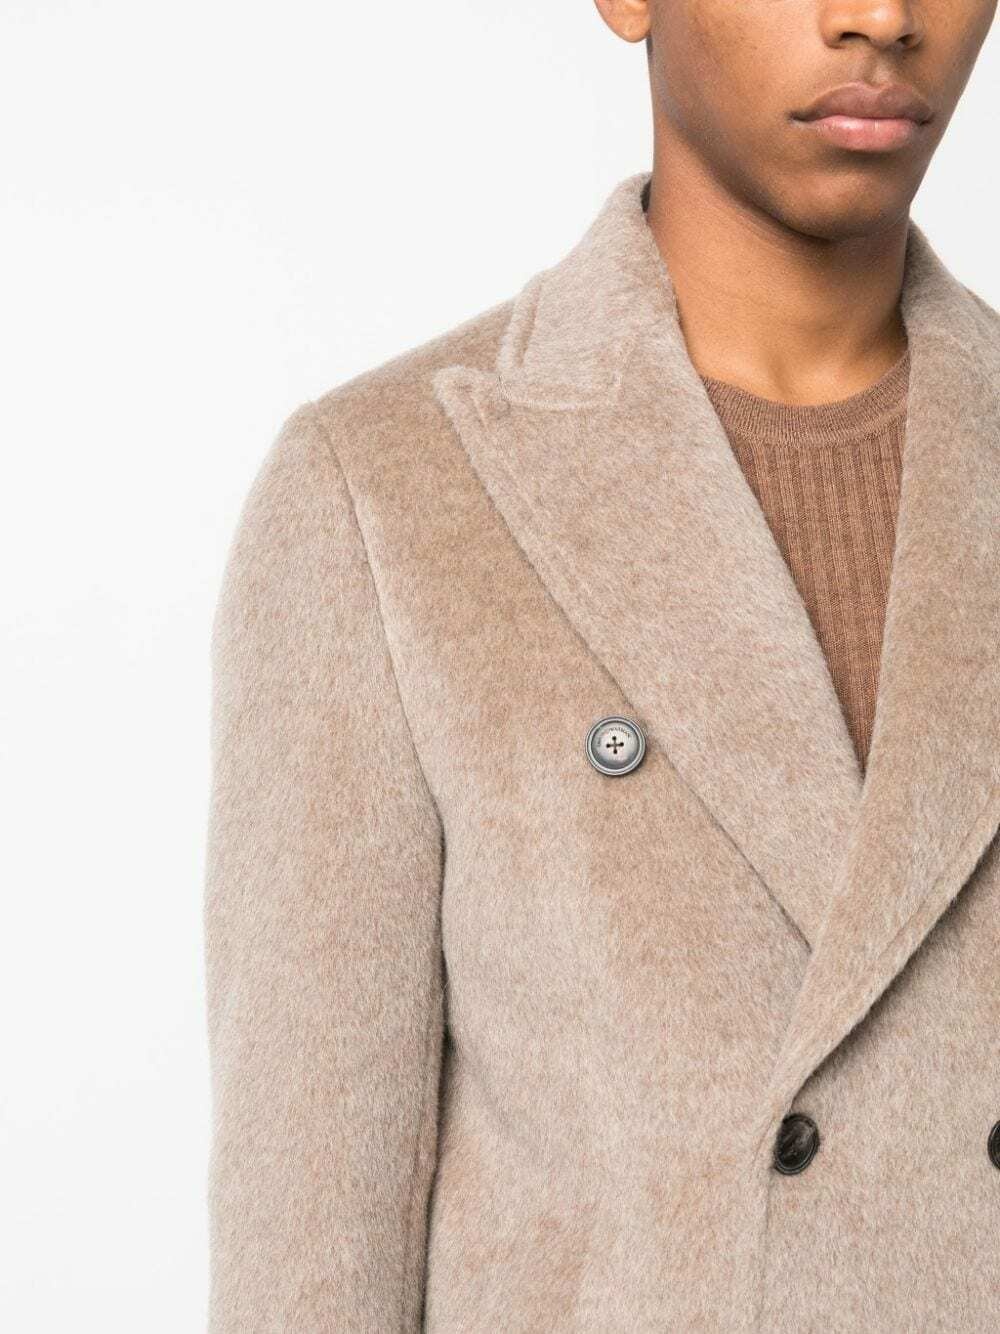 EMPORIO ARMANI - Wool Double-breasted Coat